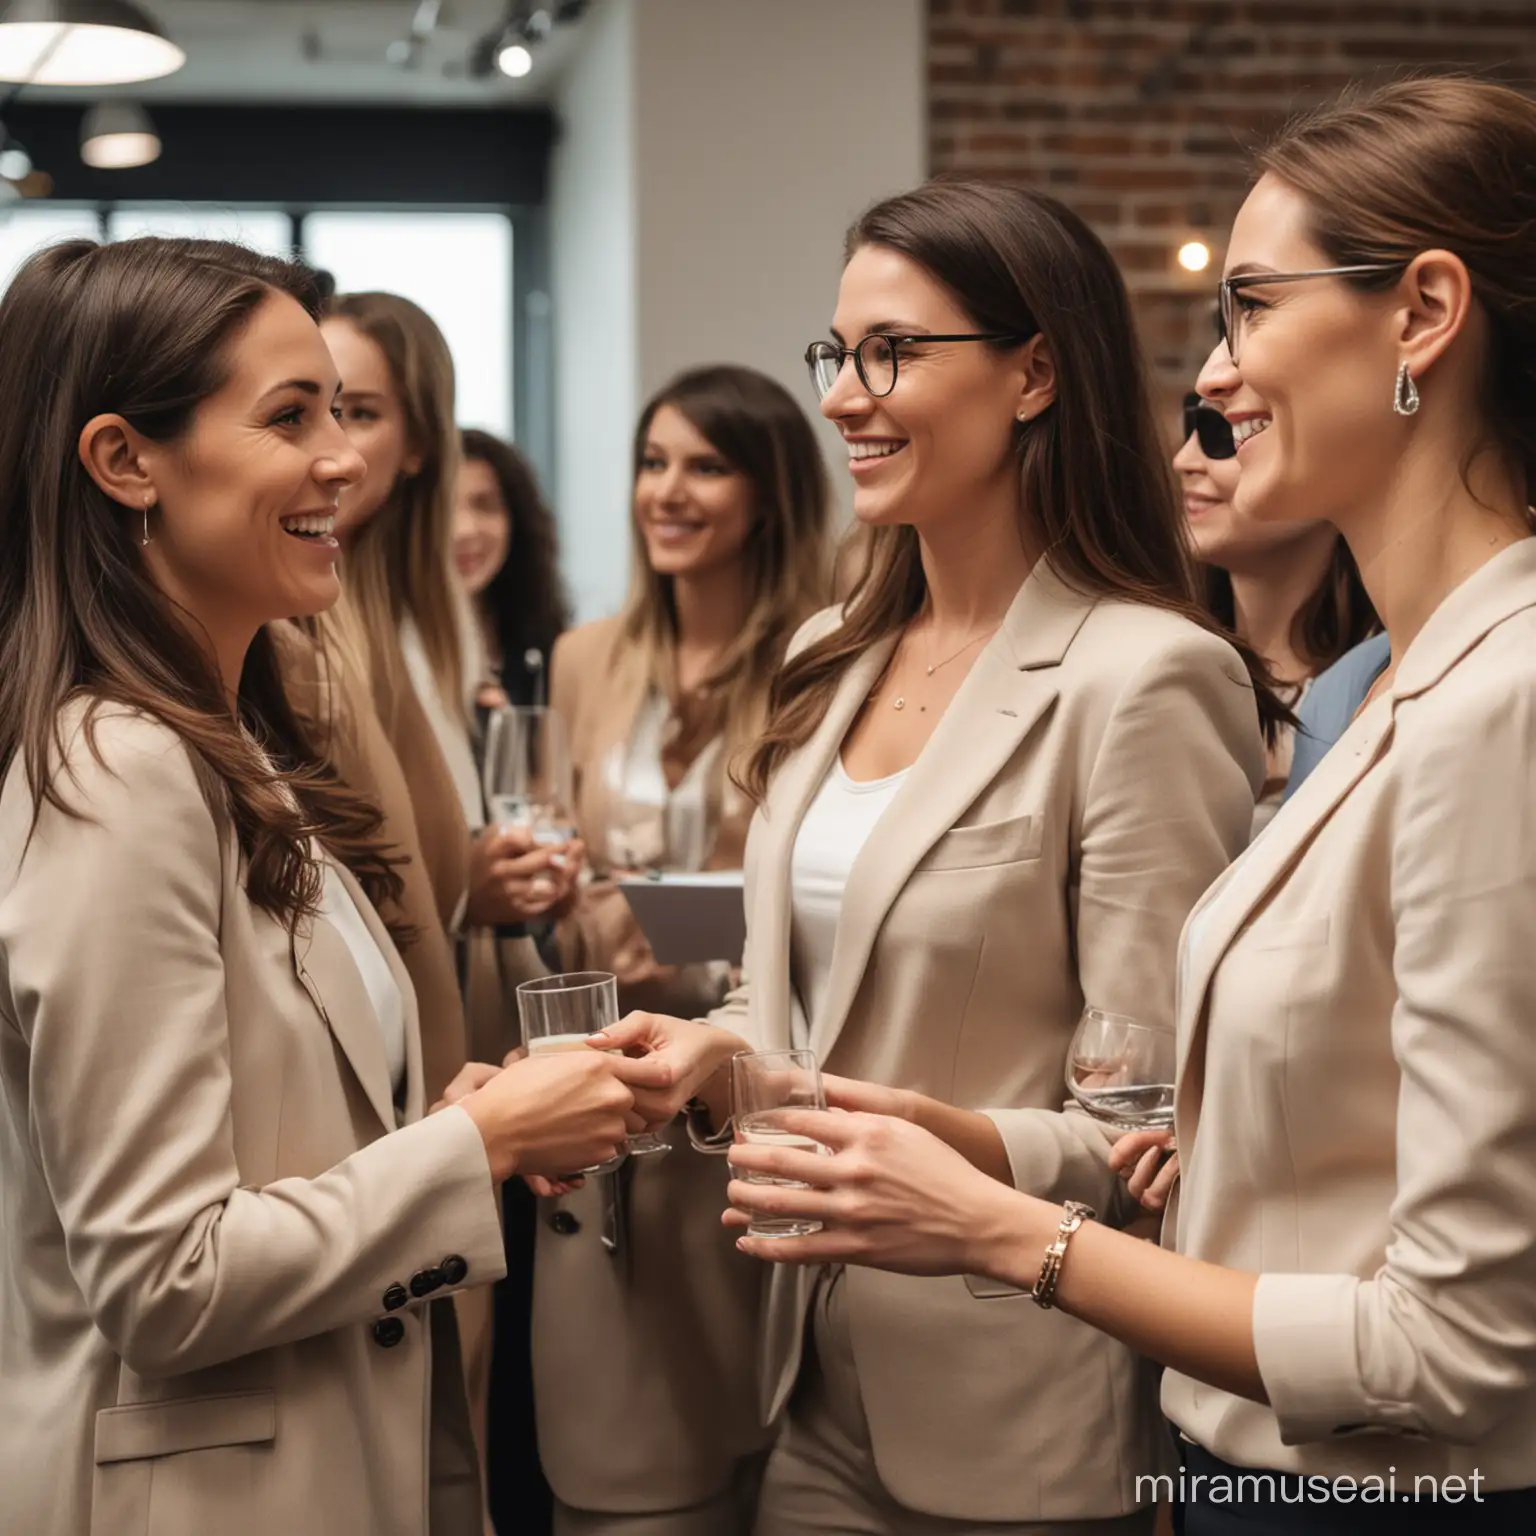 Generate a realistic image of a networking event for female founders.